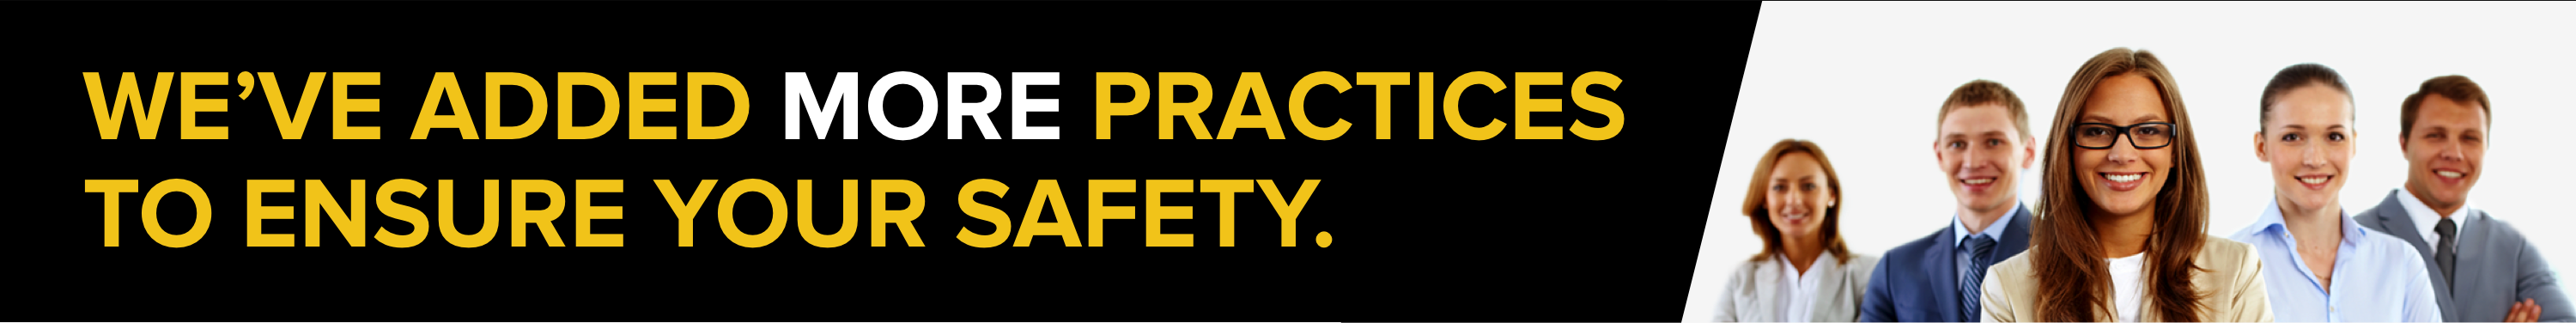 We've added more practices to ensure your safety